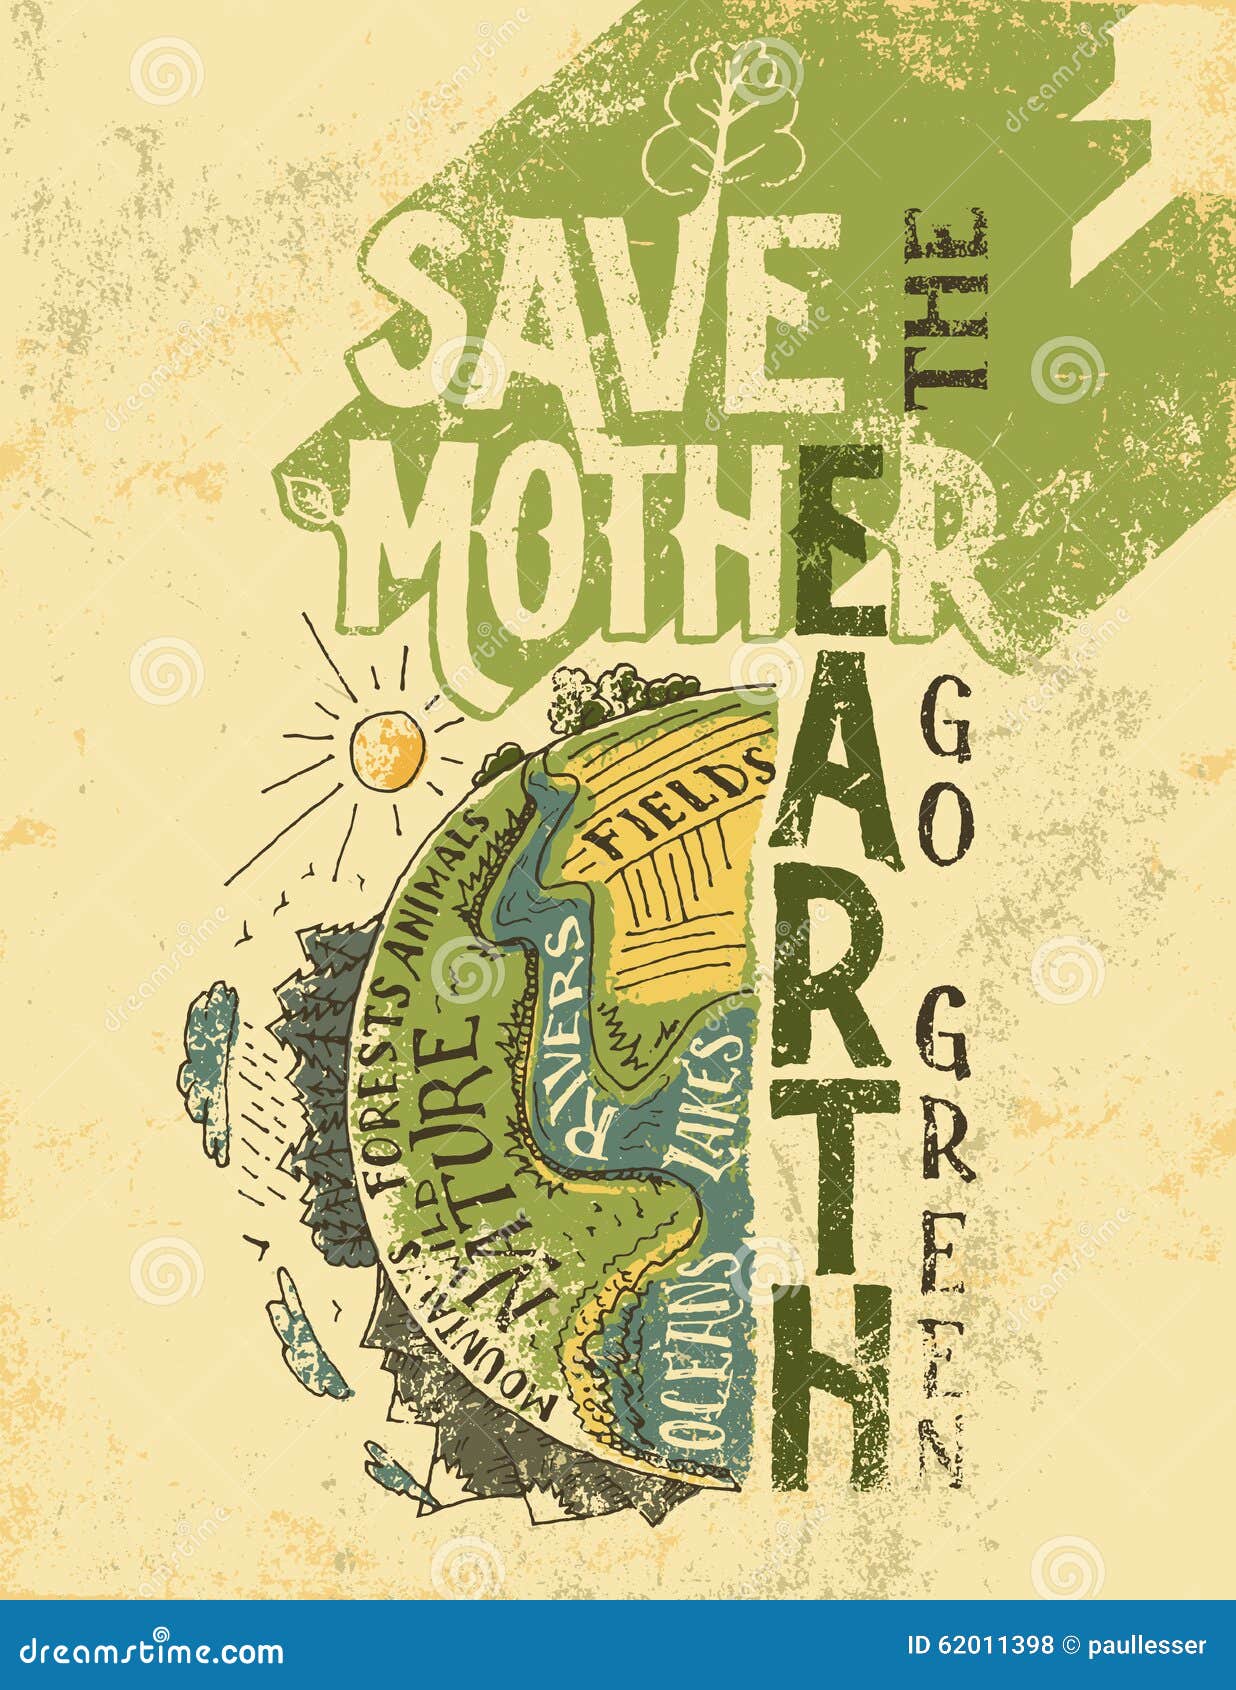 Save Earth Drawing Images - Free Download on Freepik